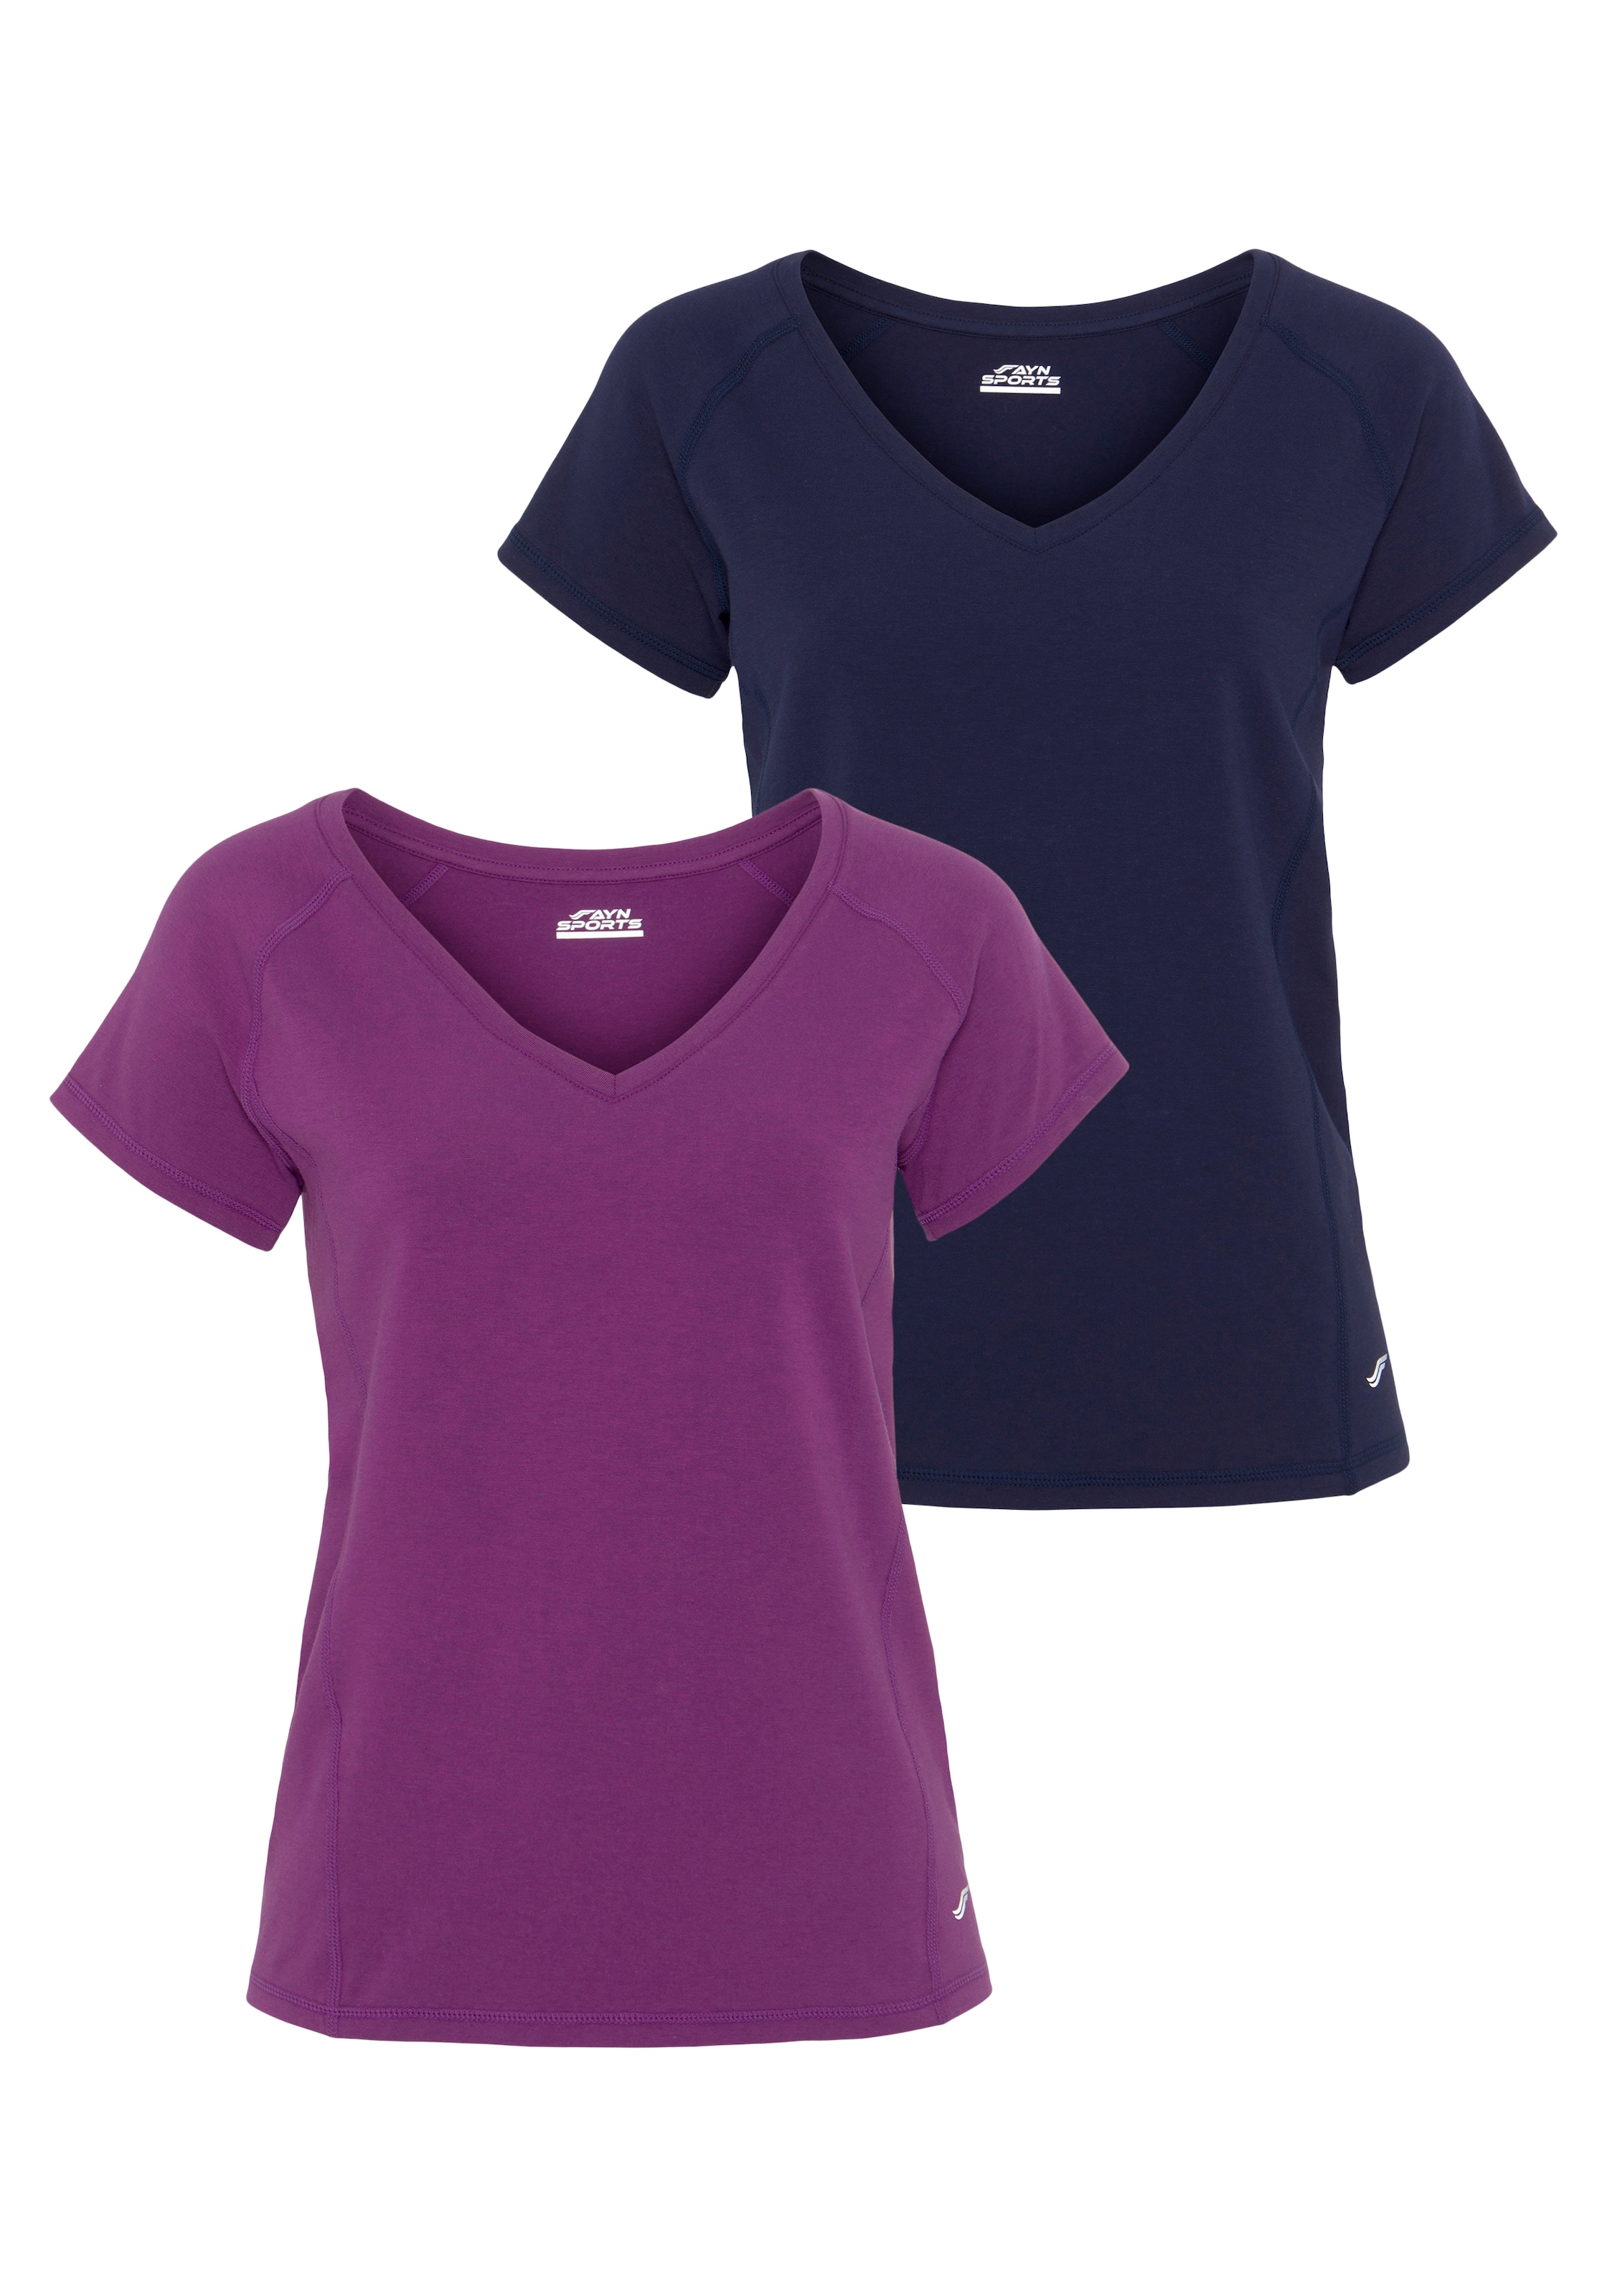 2er-Pack) »Double Essential«, T-Shirt FAYN bei 2 Pack ♕ SPORTS (Packung, tlg.,